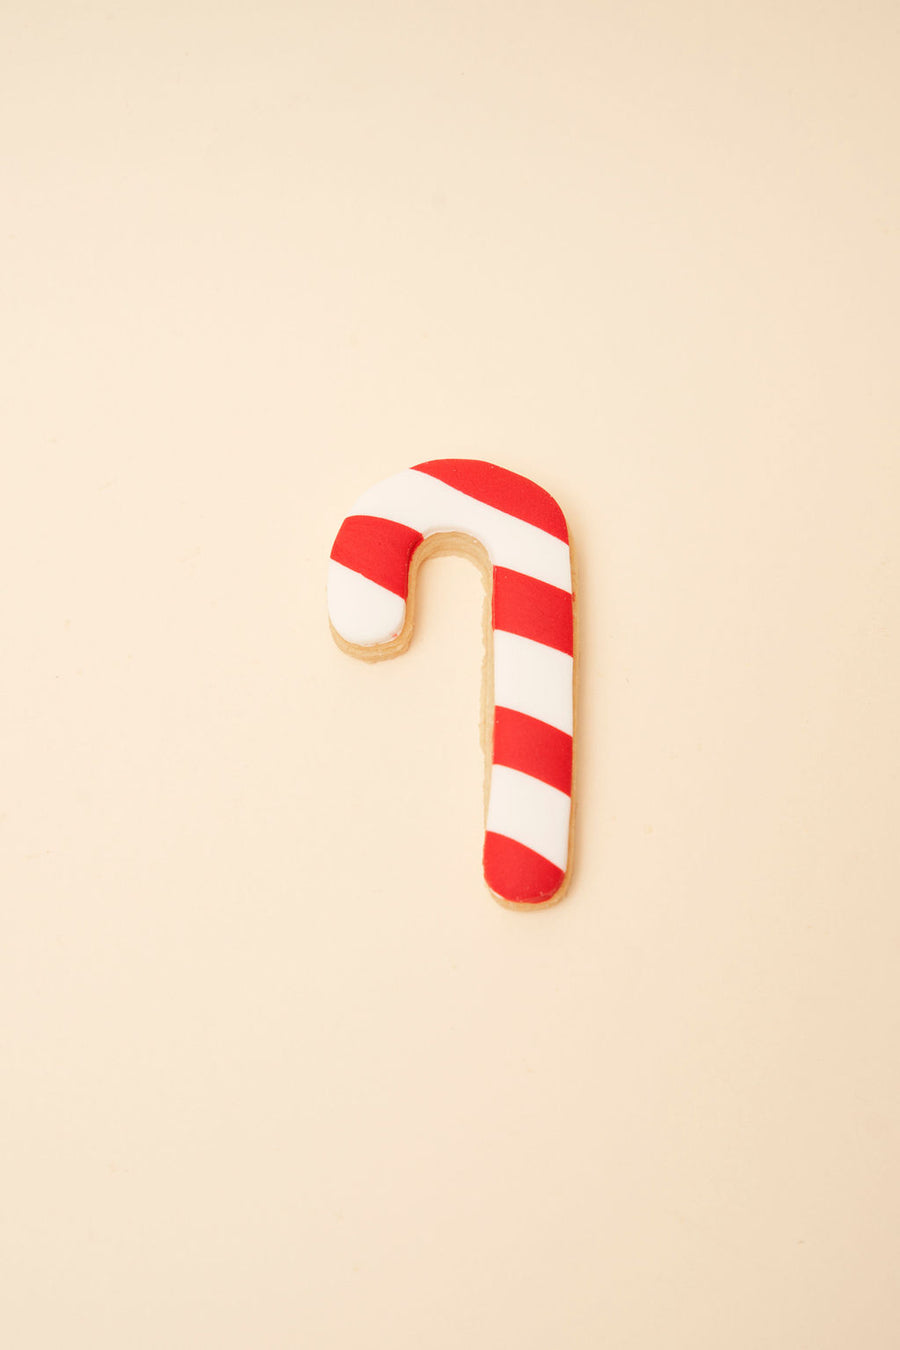 Candy Cane Ornament Cookies